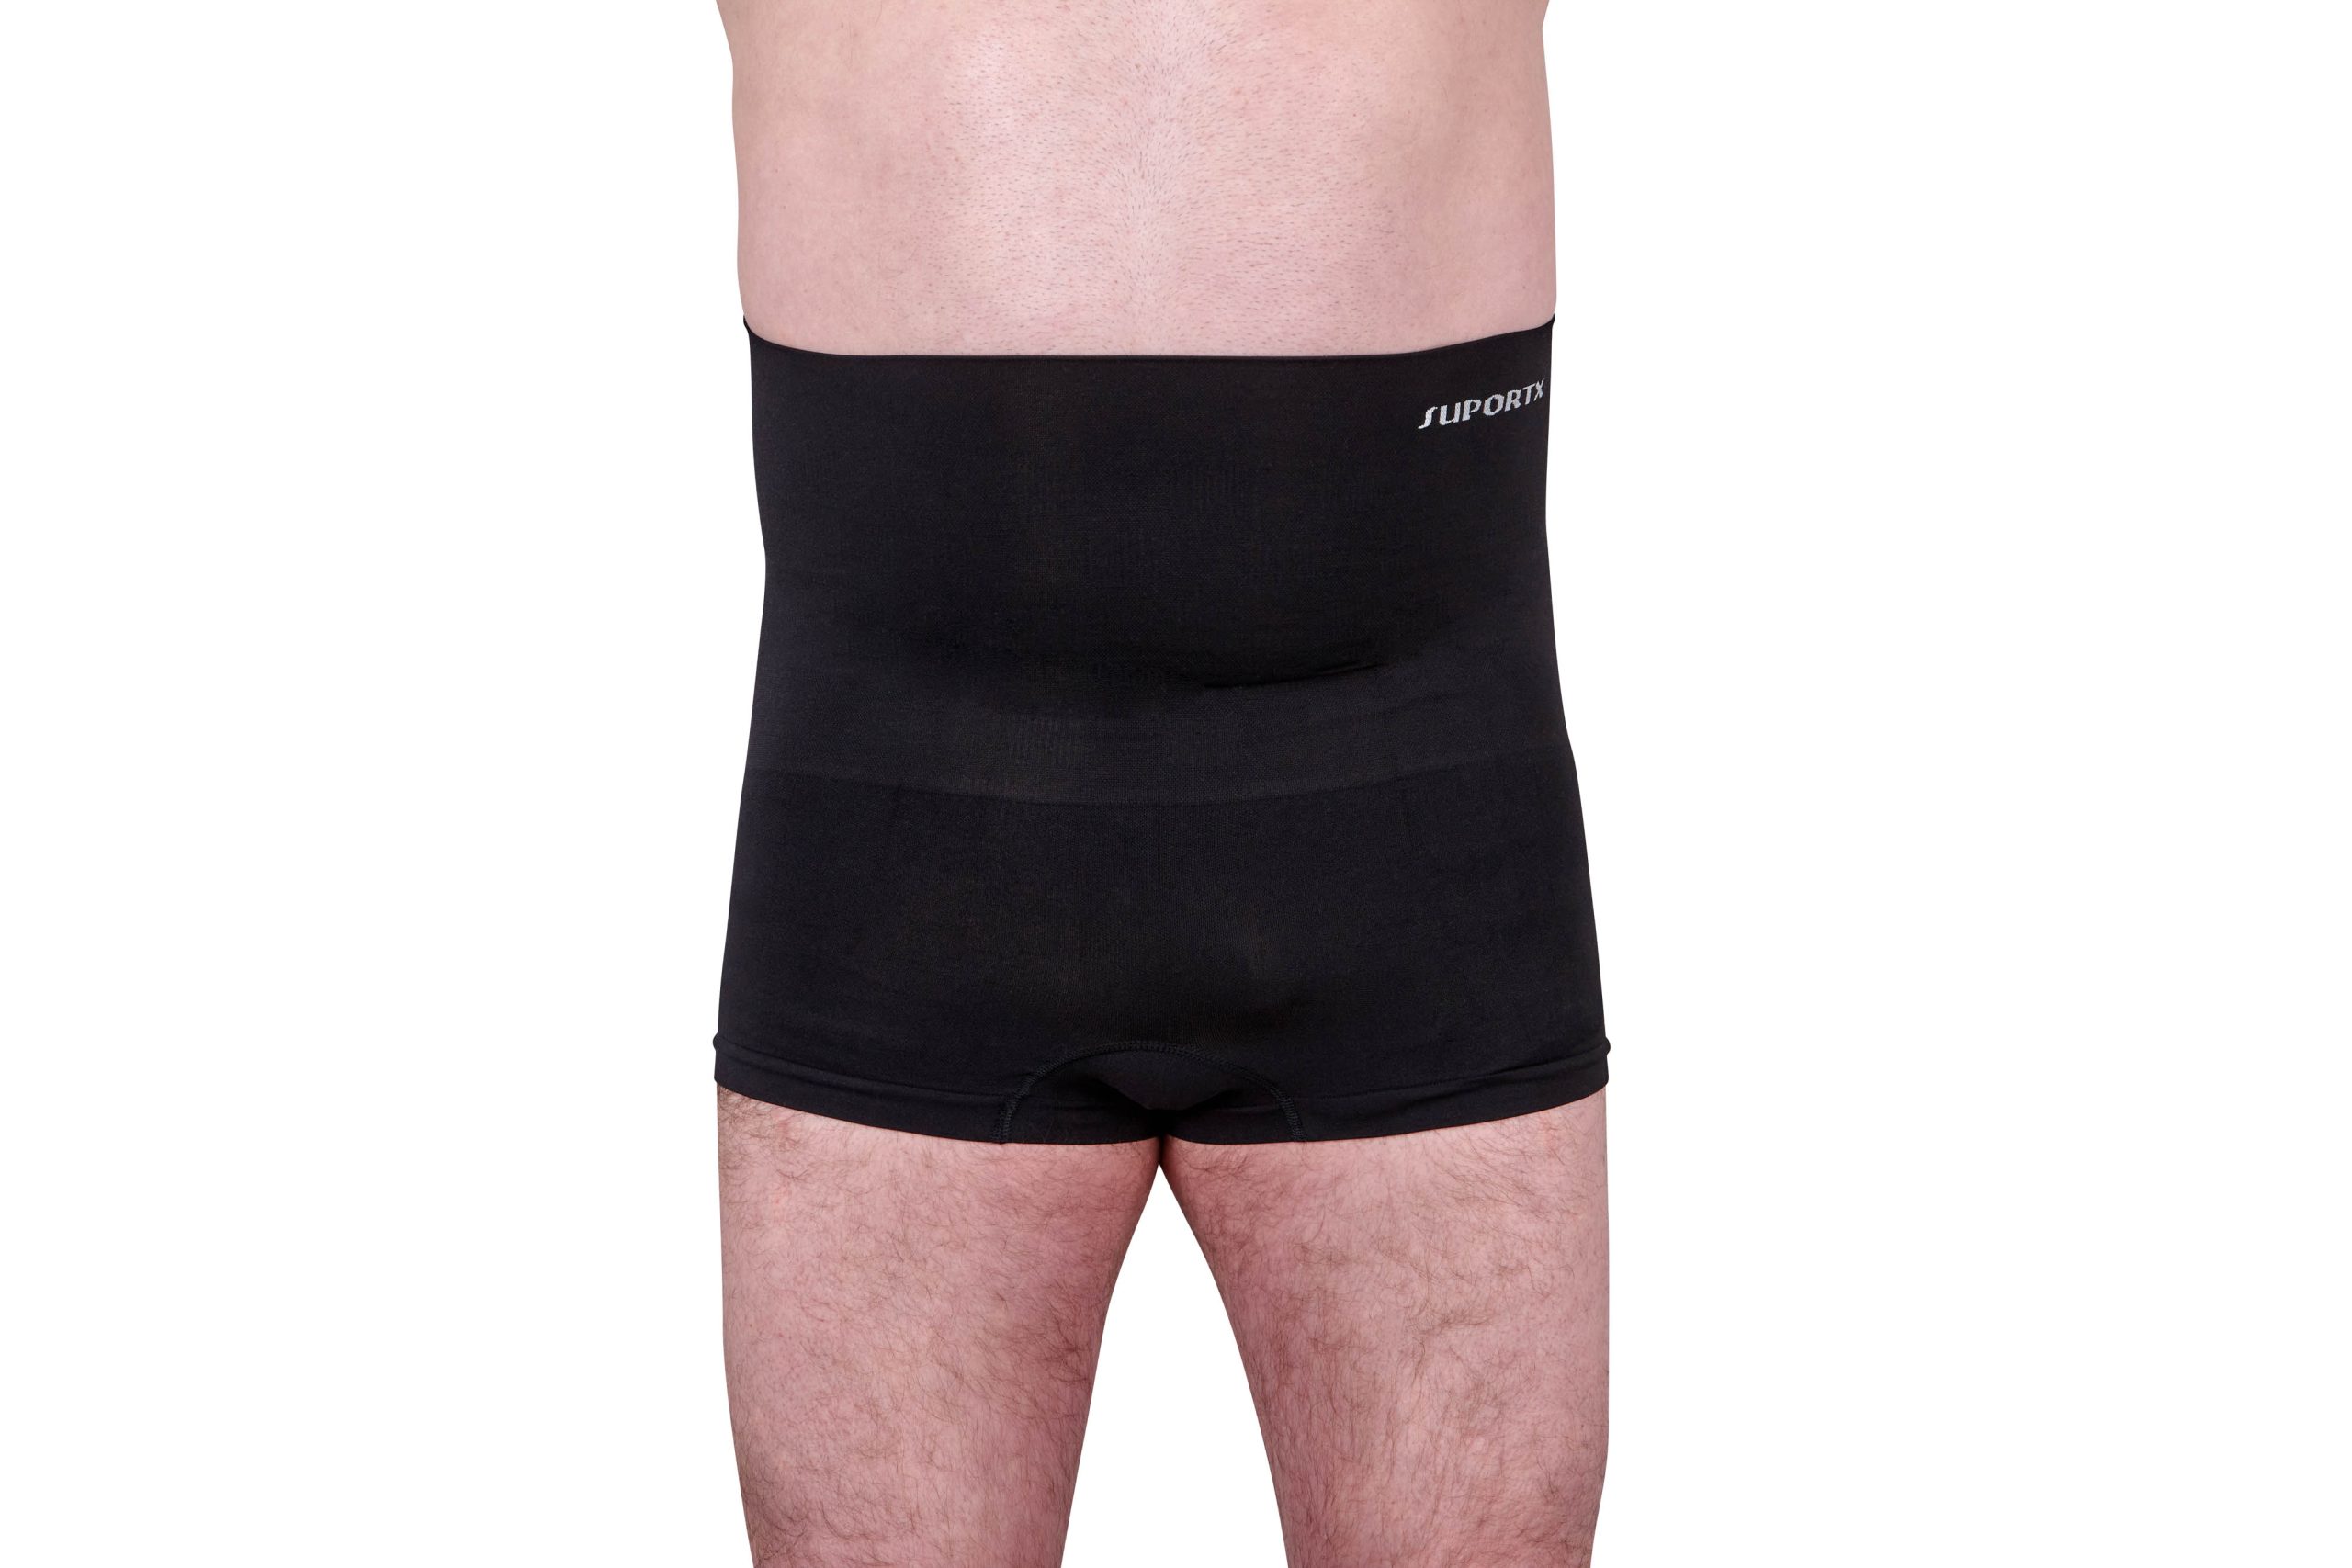 SUPORTX Hernia Support Girdles - Sutherland Medical